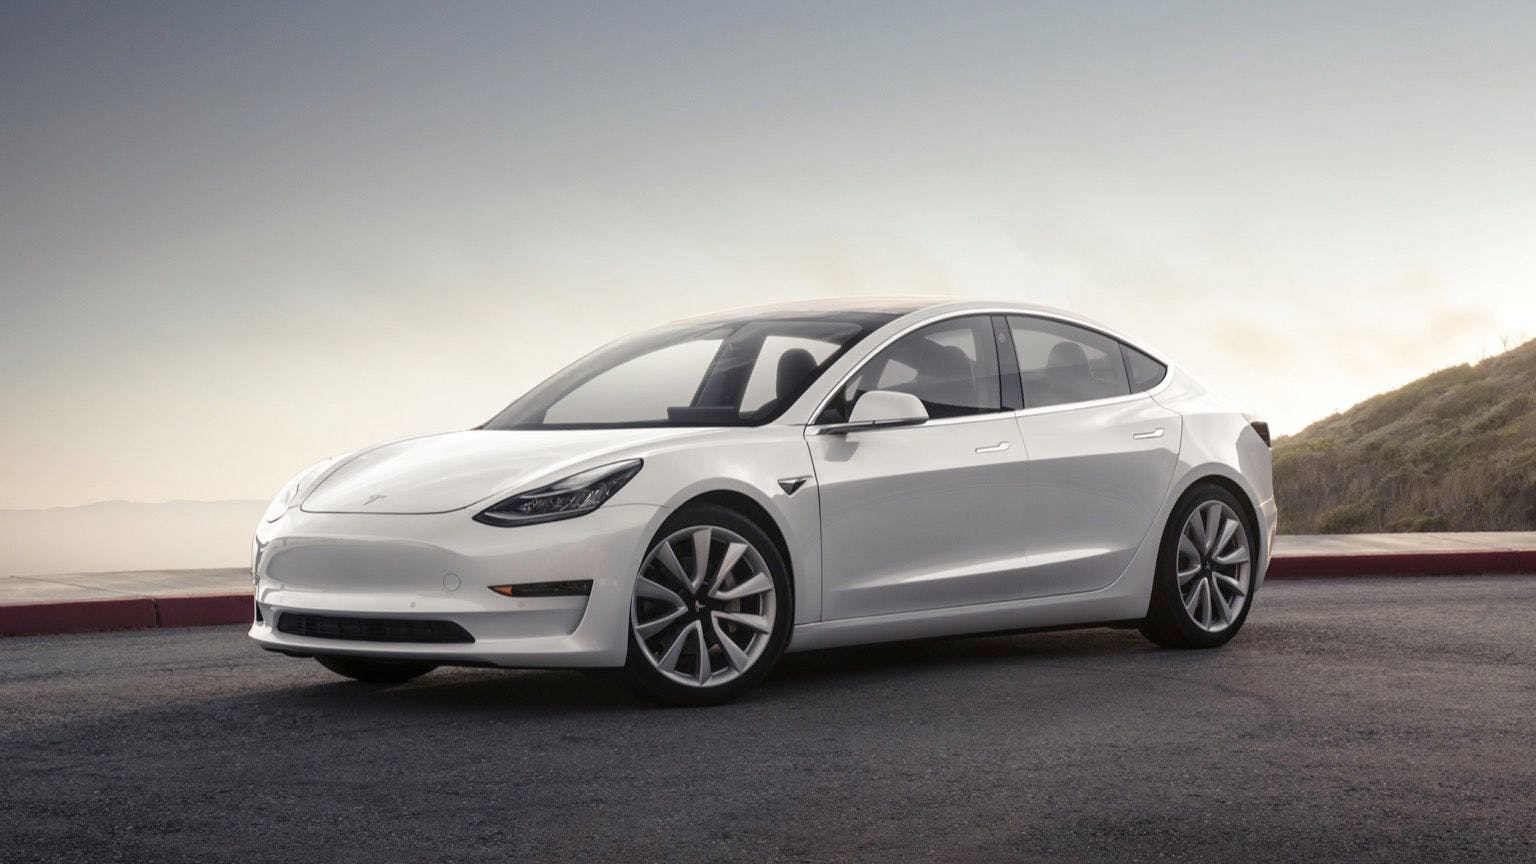 How Much Does it Cost to Own a Tesla Model 3 in 2022?